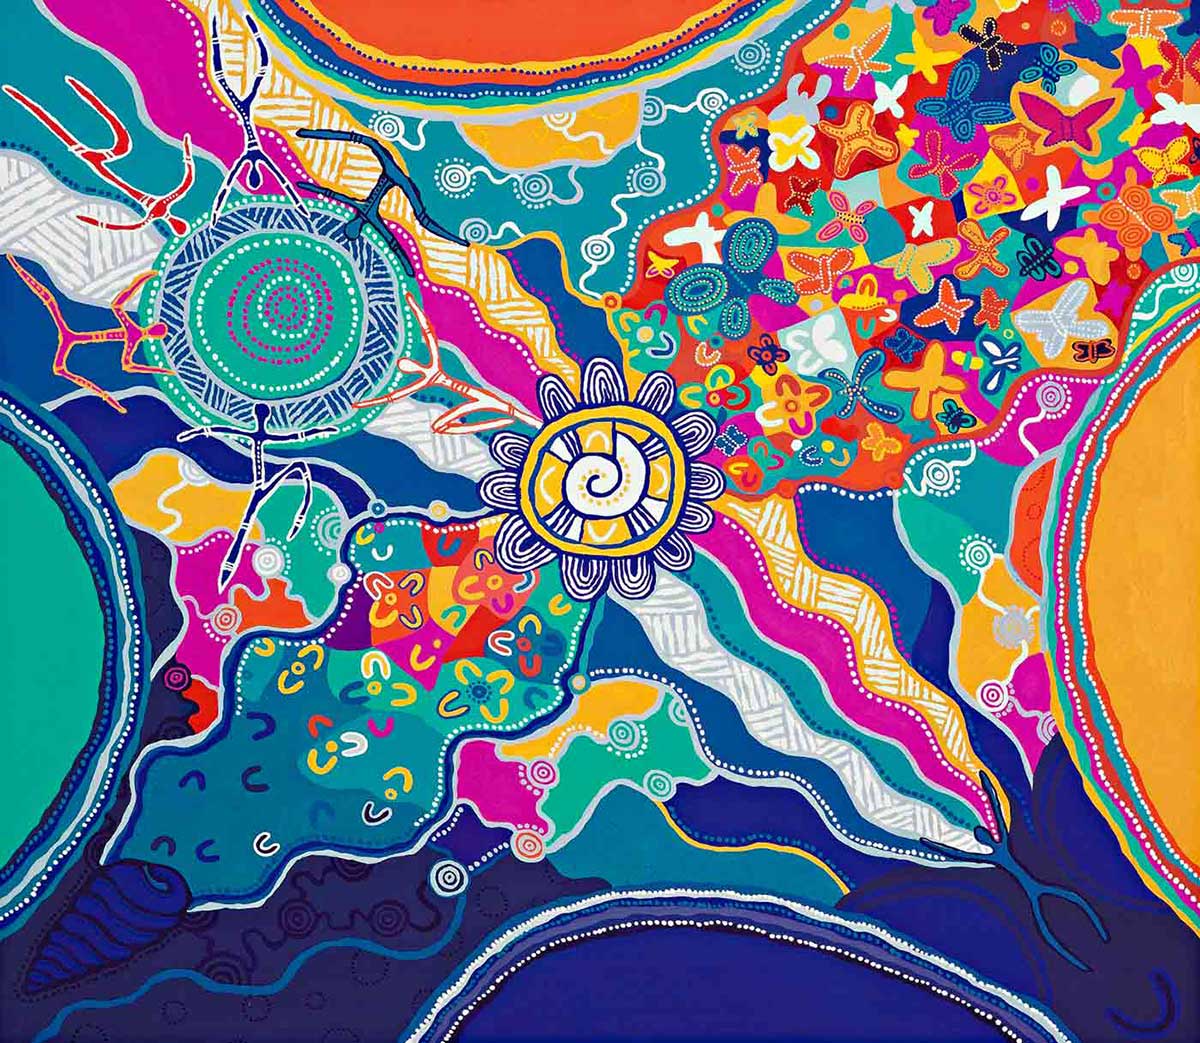 A gouache painting on paper set in white mount. The multicoloured design features a central sphere with a spiral and groups of concentric arches around the edge. There are four half circles, one on each border of the painting, with bands of colours and white dots around the edges. They are red, teal green, dark blue and yellow ochre. There are wavey bands of blue, white, teal green, deep pink and yellow, with hatching, that cross diagonally from lower right to upper left. There is a blue silhouette figure in the lower right and five more around a teal blue sphere. Crossing diagonally from lower left to upper right is a band of small, multicoloured shapes on a blue background at the bottom, and a red background at the top.